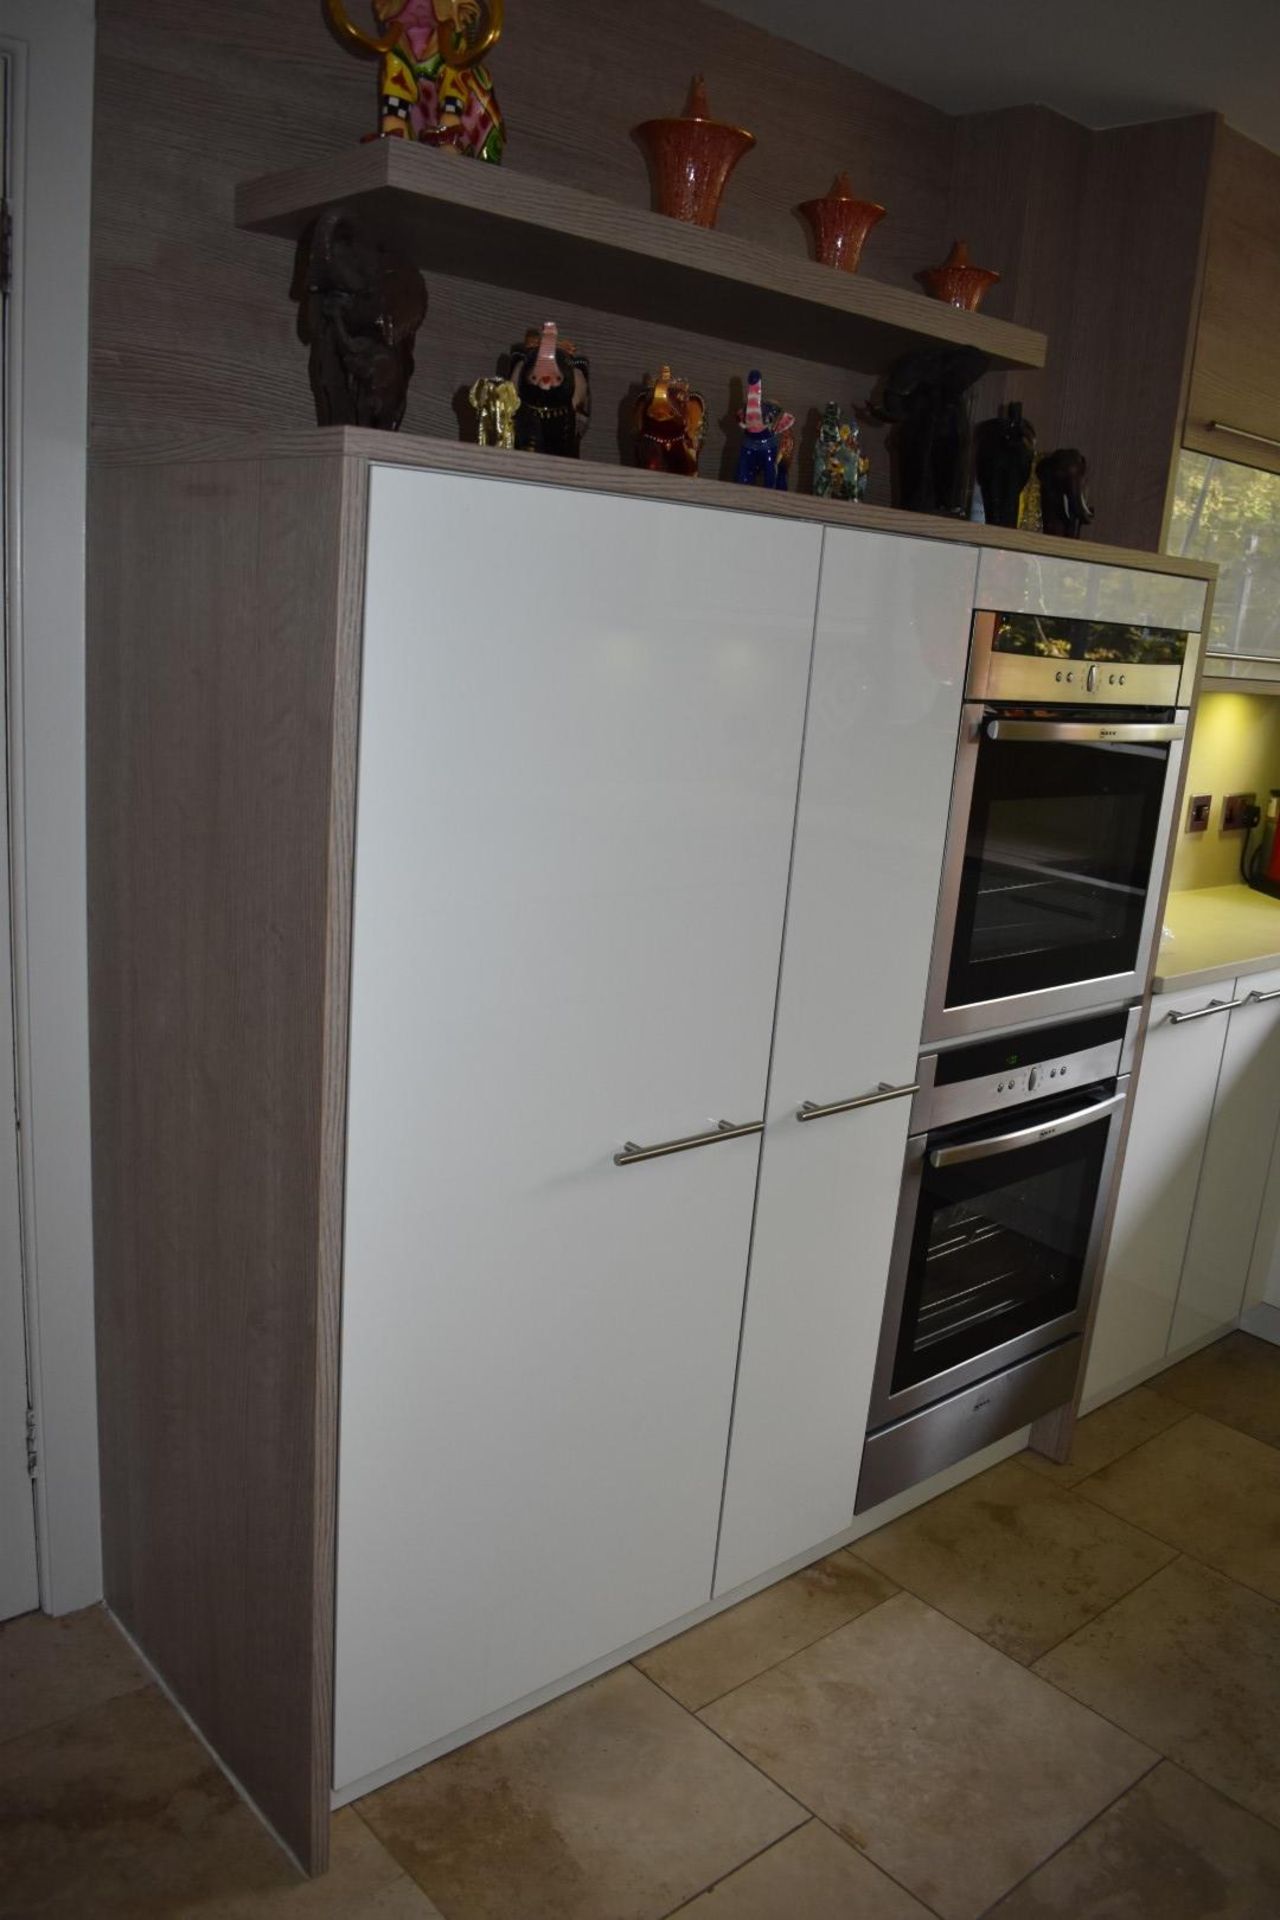 1 x Pronorm Einbauküchen German Made Fitted Kitchen With Contemporary High Gloss Cream Doors and - Image 20 of 50